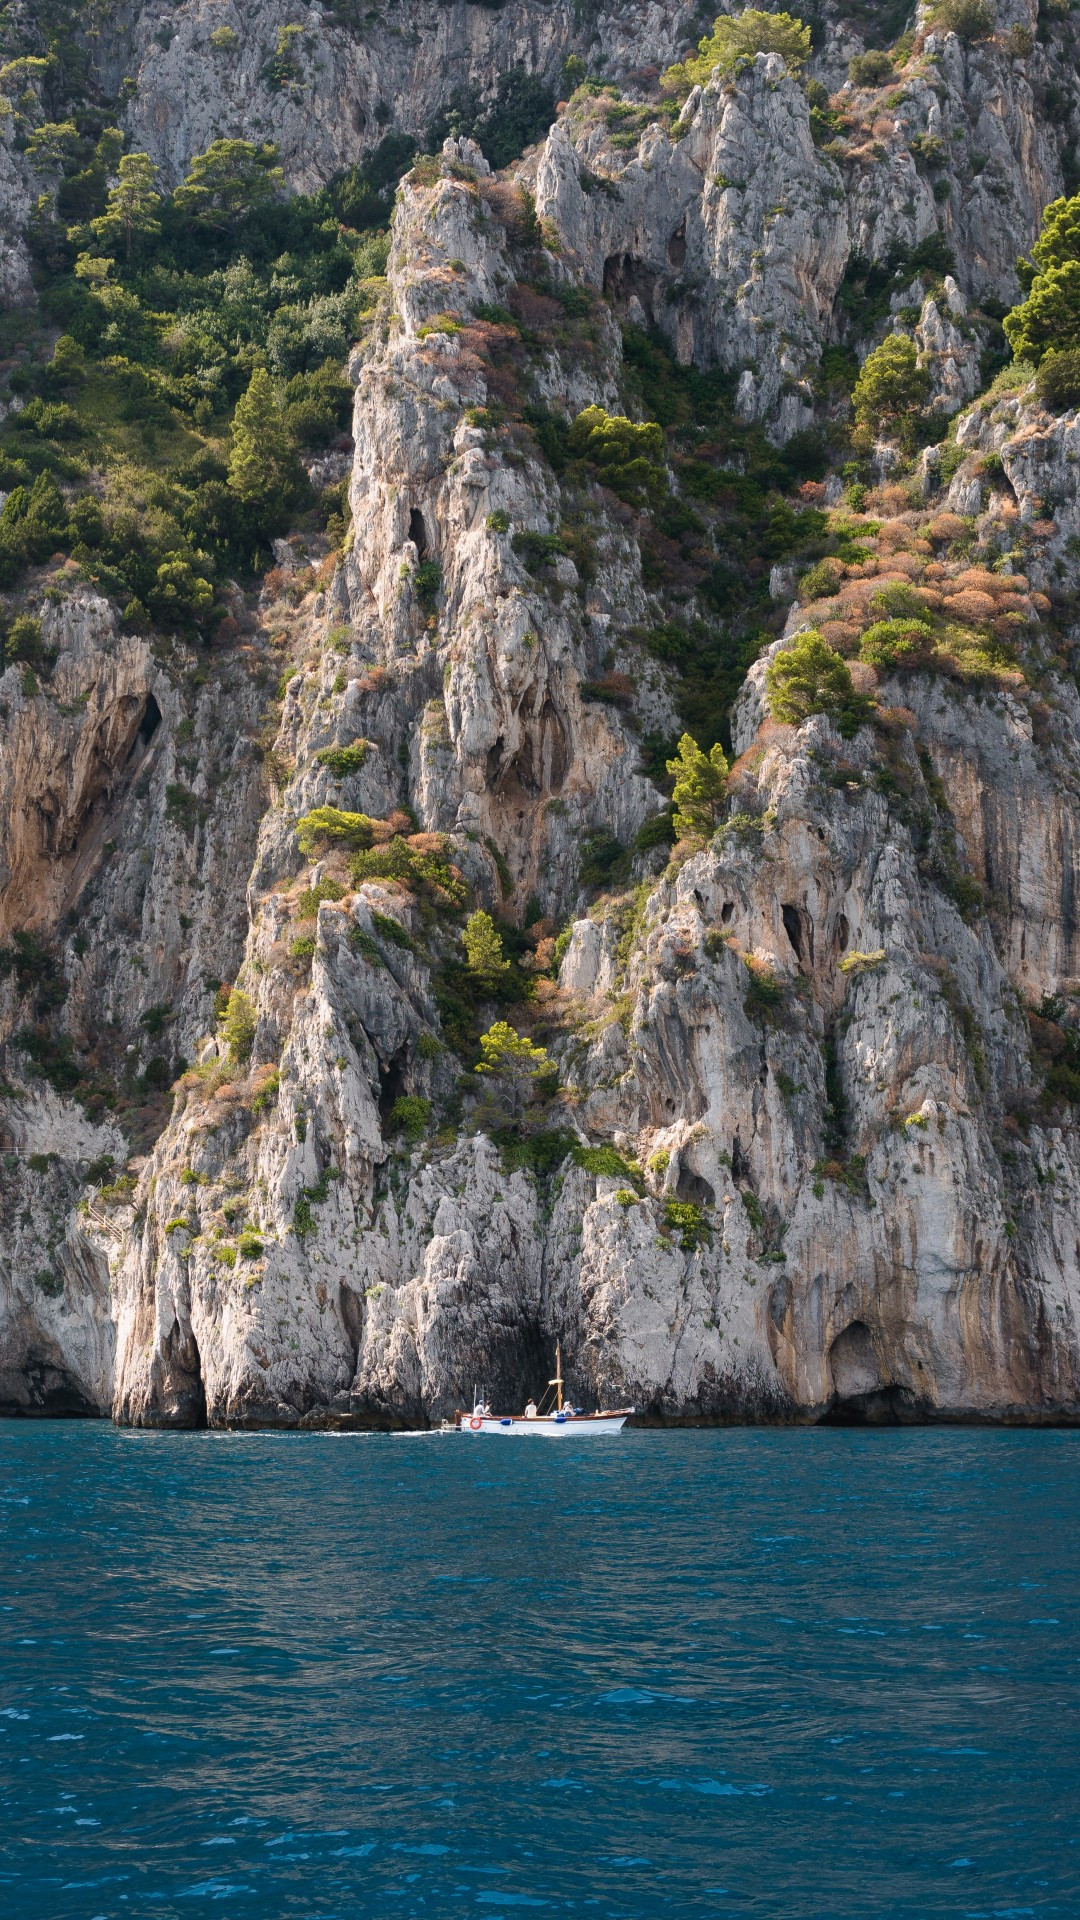 Download 1080x1920 Italy Capri Island, Boat, Cliff, Ocean Wallpaper for iPhone iPhone 7 Plus, iPhone 6+, Sony Xperia Z, HTC One